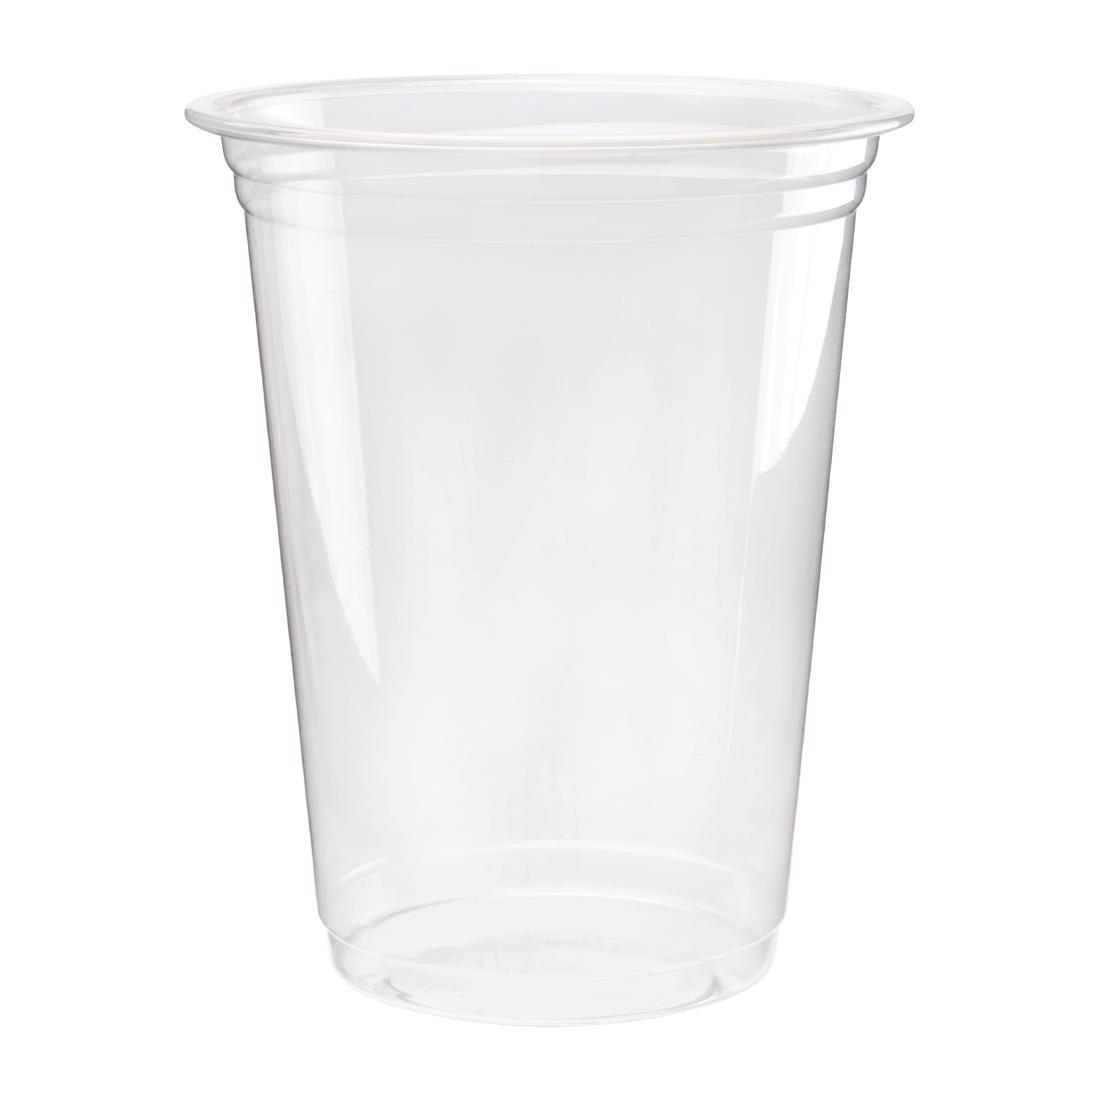 Fiesta Compostable PLA Cold Cups 454ml / 16oz (Pack of 1000) - FA343  - 1